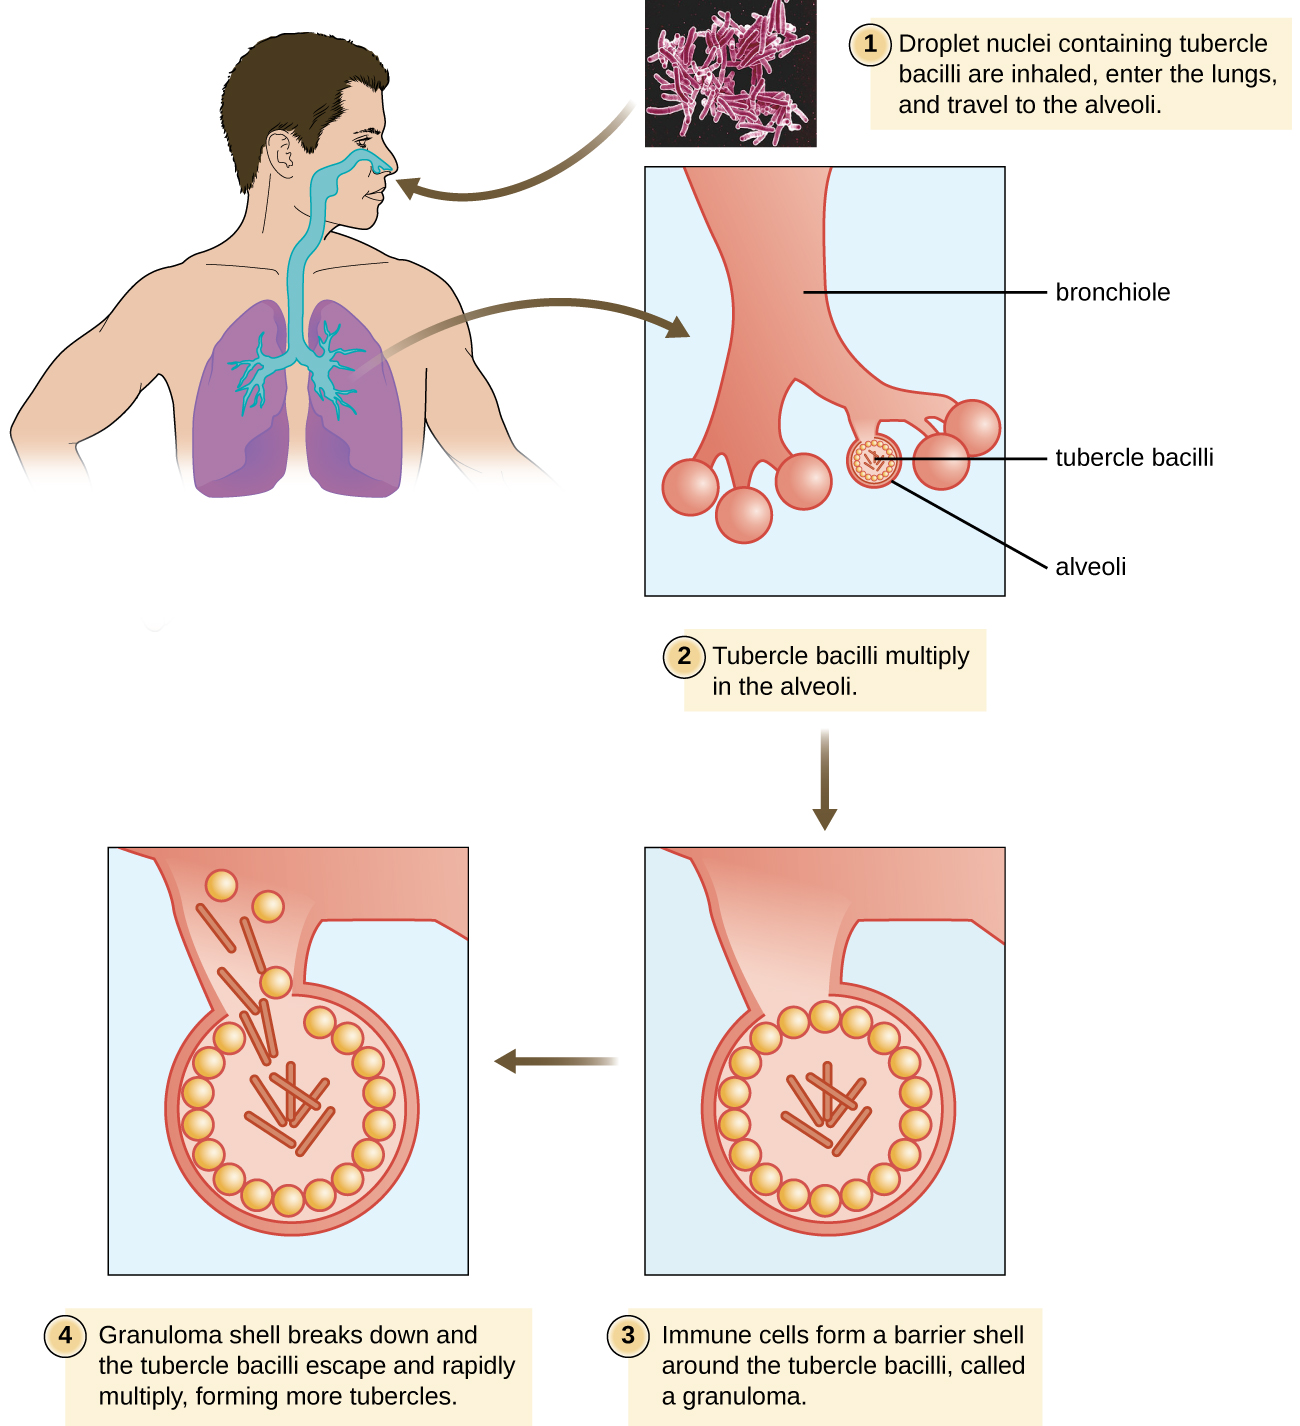 Diagram showing infectious cycle of tuberculosis. First a droplet nuclei containing tubercle bacilli are inhaled, enter the lungs and travel to the alveoli. Next, the tubercle bacilli multiply in the alveoli. Next, the immune cells form a barrier shell around the tubercle bacilli, called a granuloma. Finally, the granuloma shell breaks down and the tubercle bacilli escape and rapidly multiply forming more tubercles.